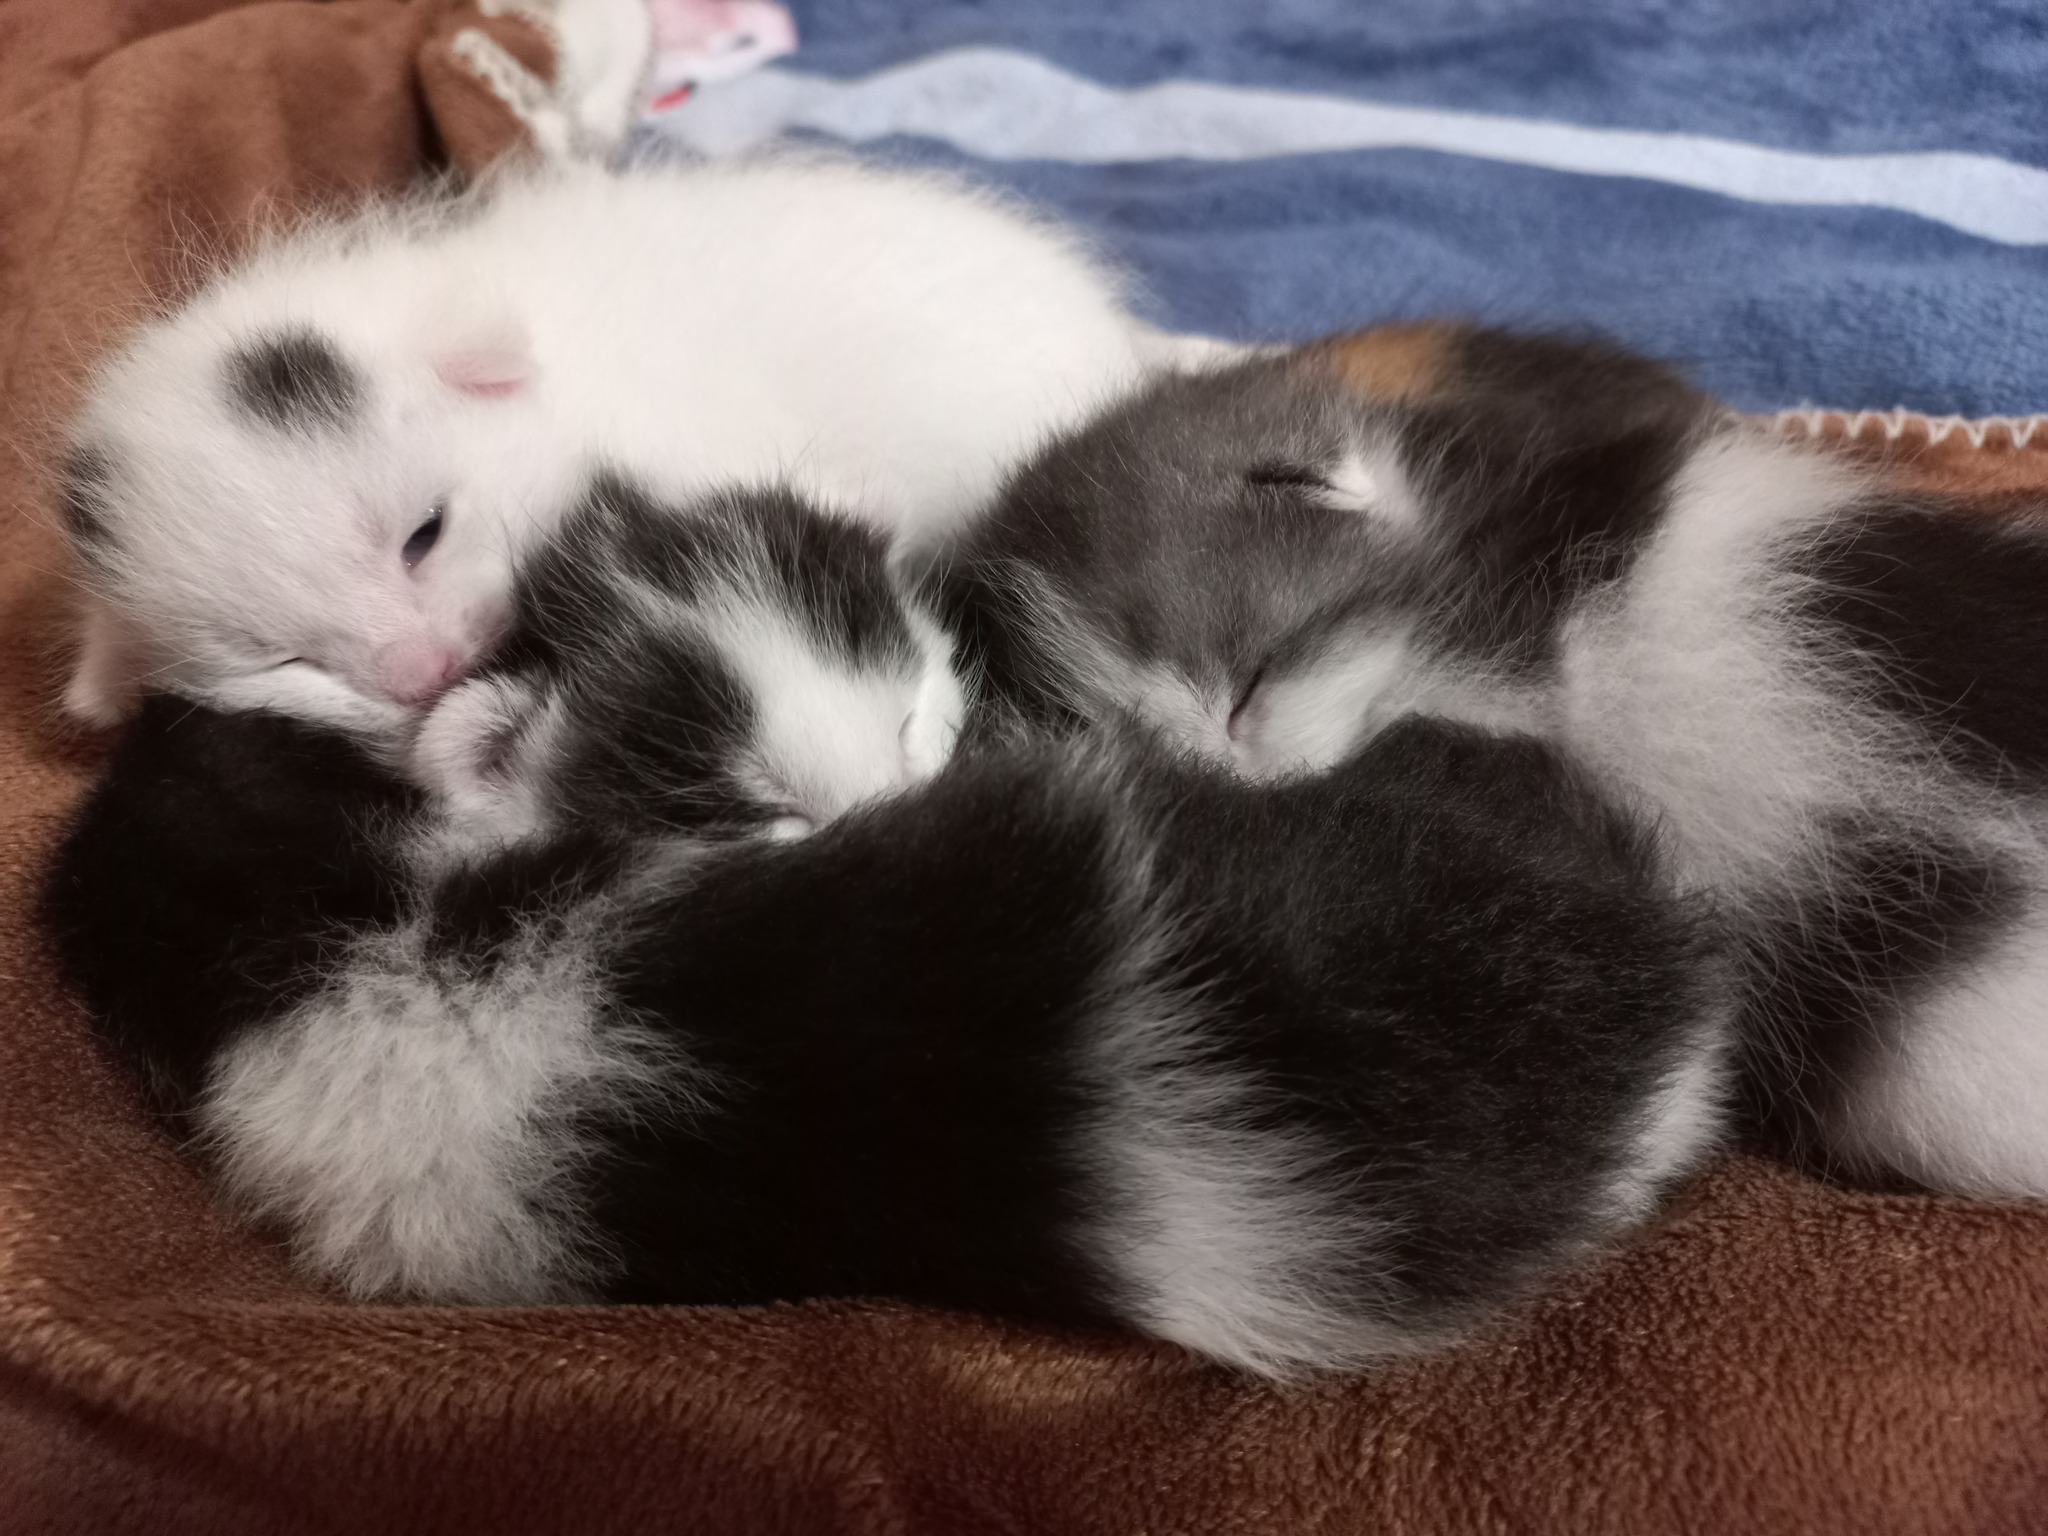 Kittens 14 days old - My, cat, Kittens, Milota, Pets, Animals, Cat pads, Pink, Black and white, Cat family, Tricolor cat, Longpost